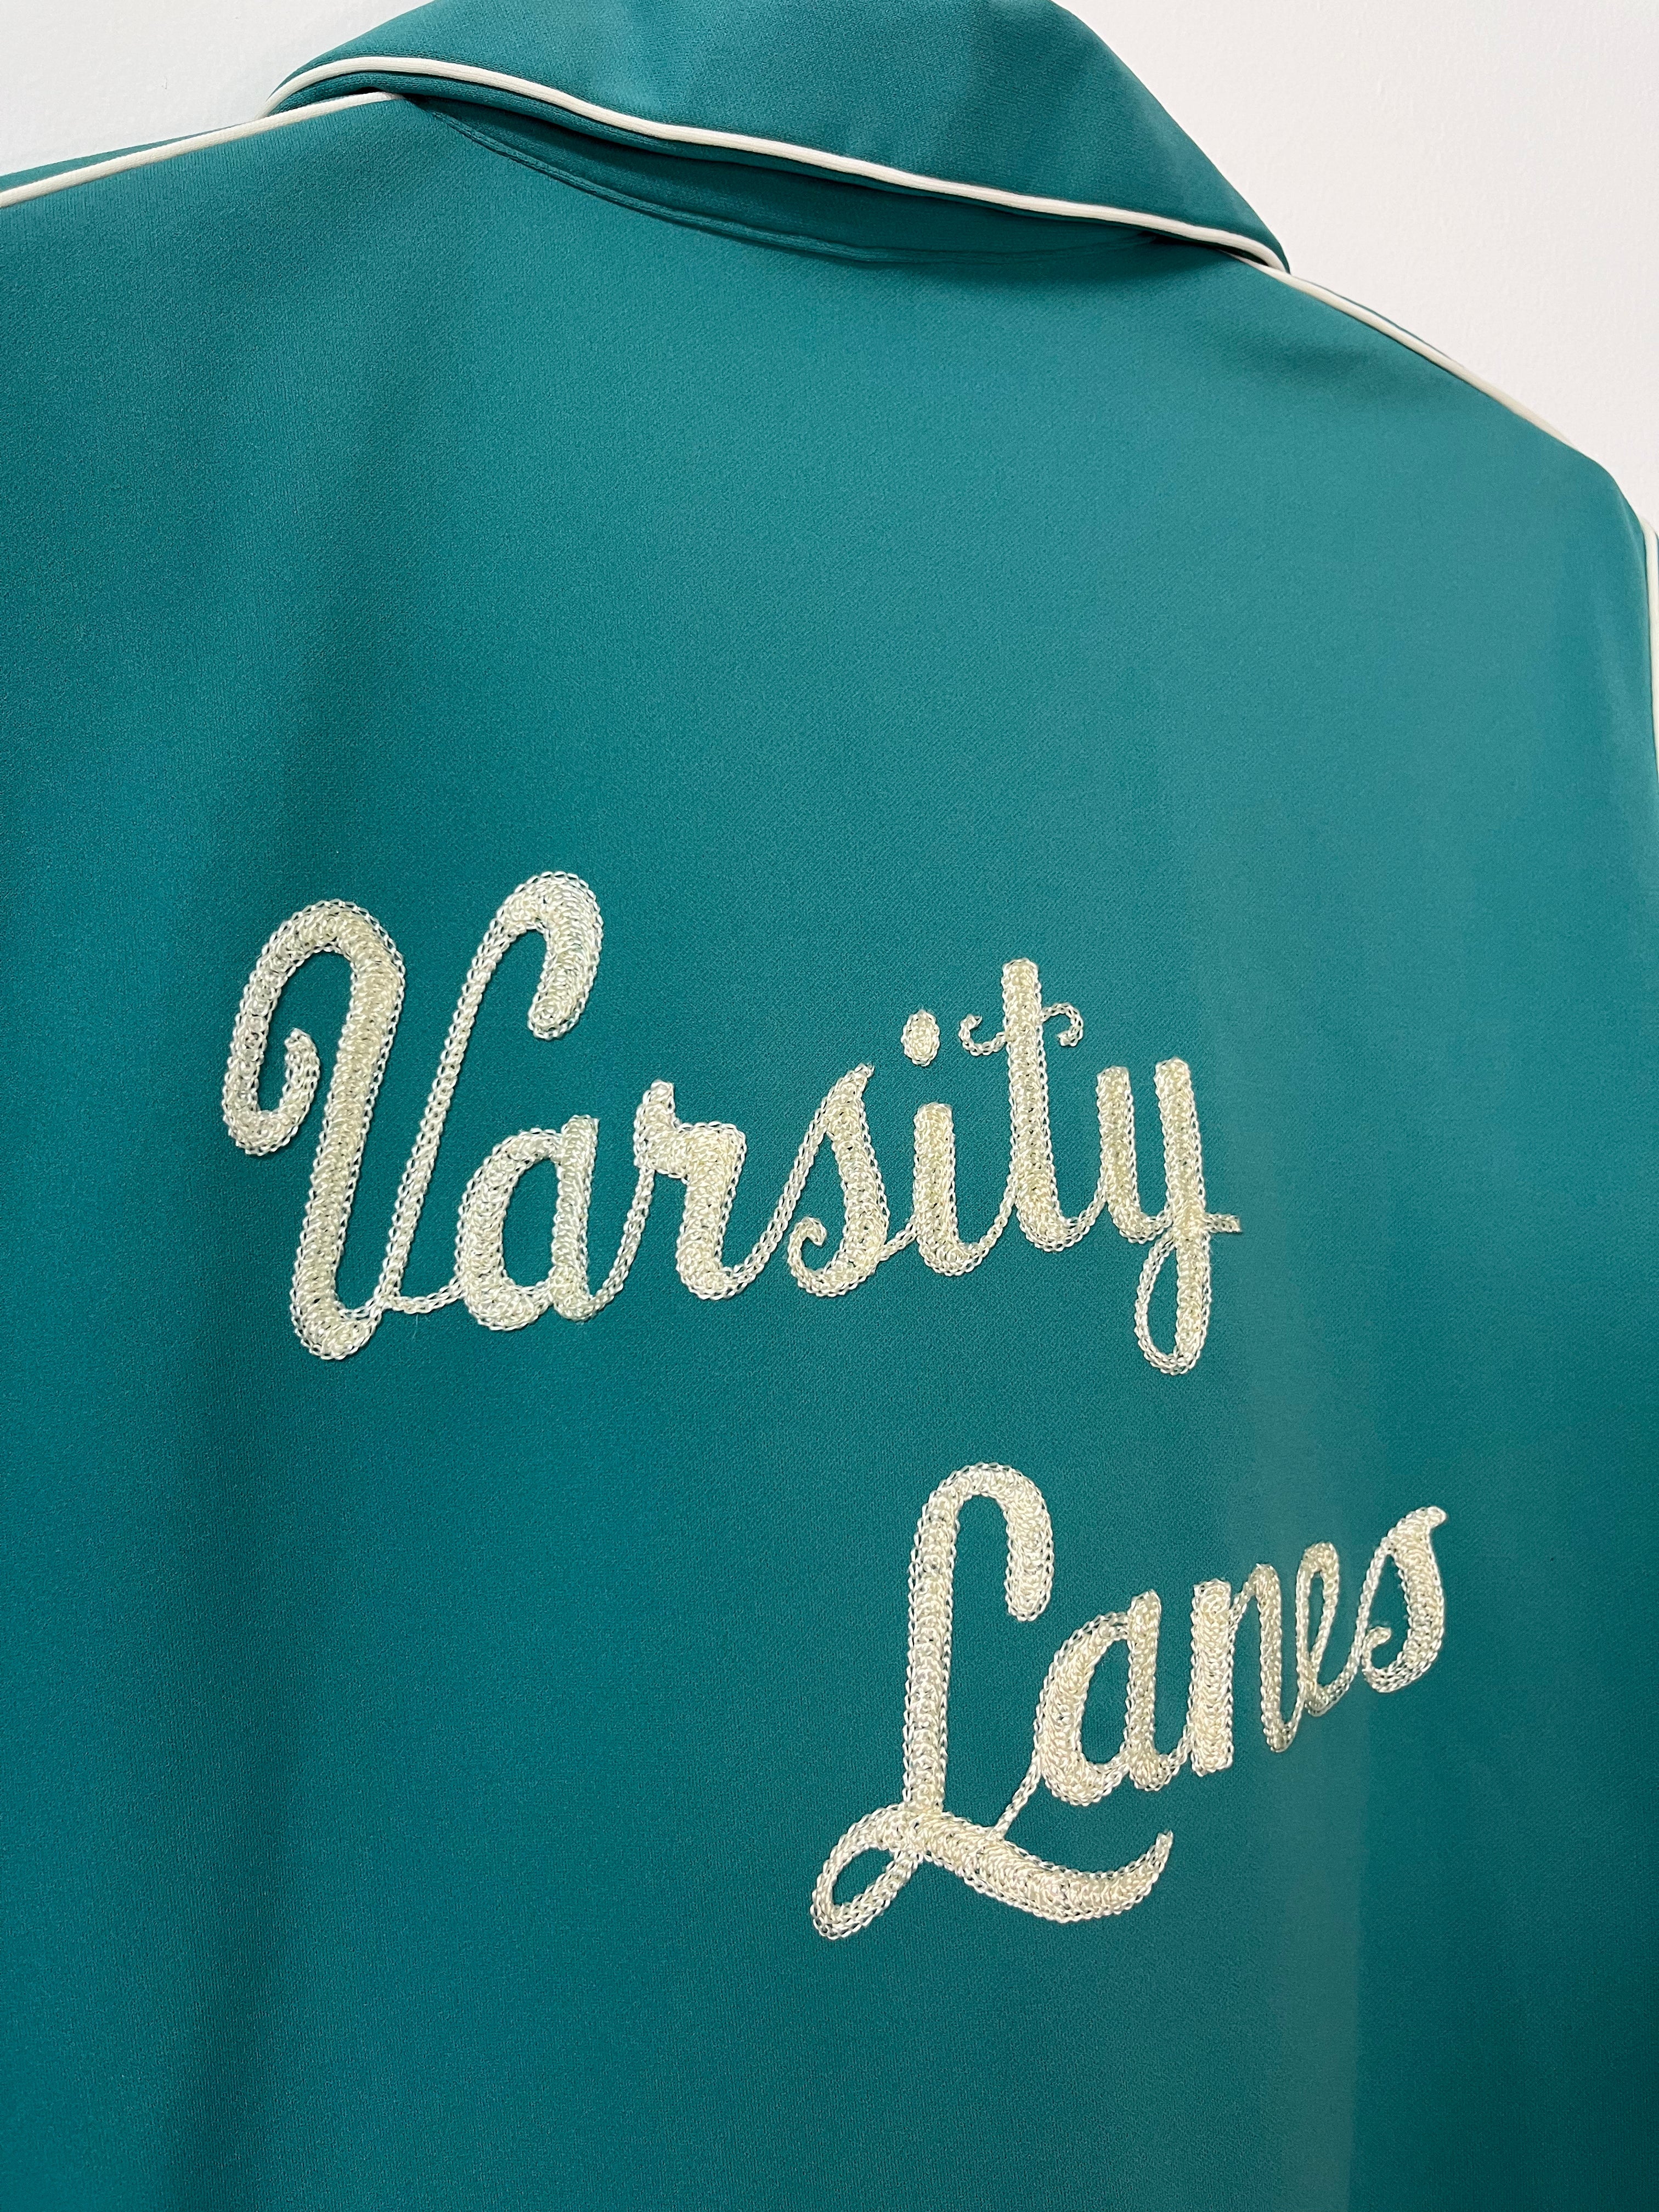 1970s ‘Varsity Lanes’ Bowling Shirt Polo Brand New King Louie - Turquoise/Teal - S